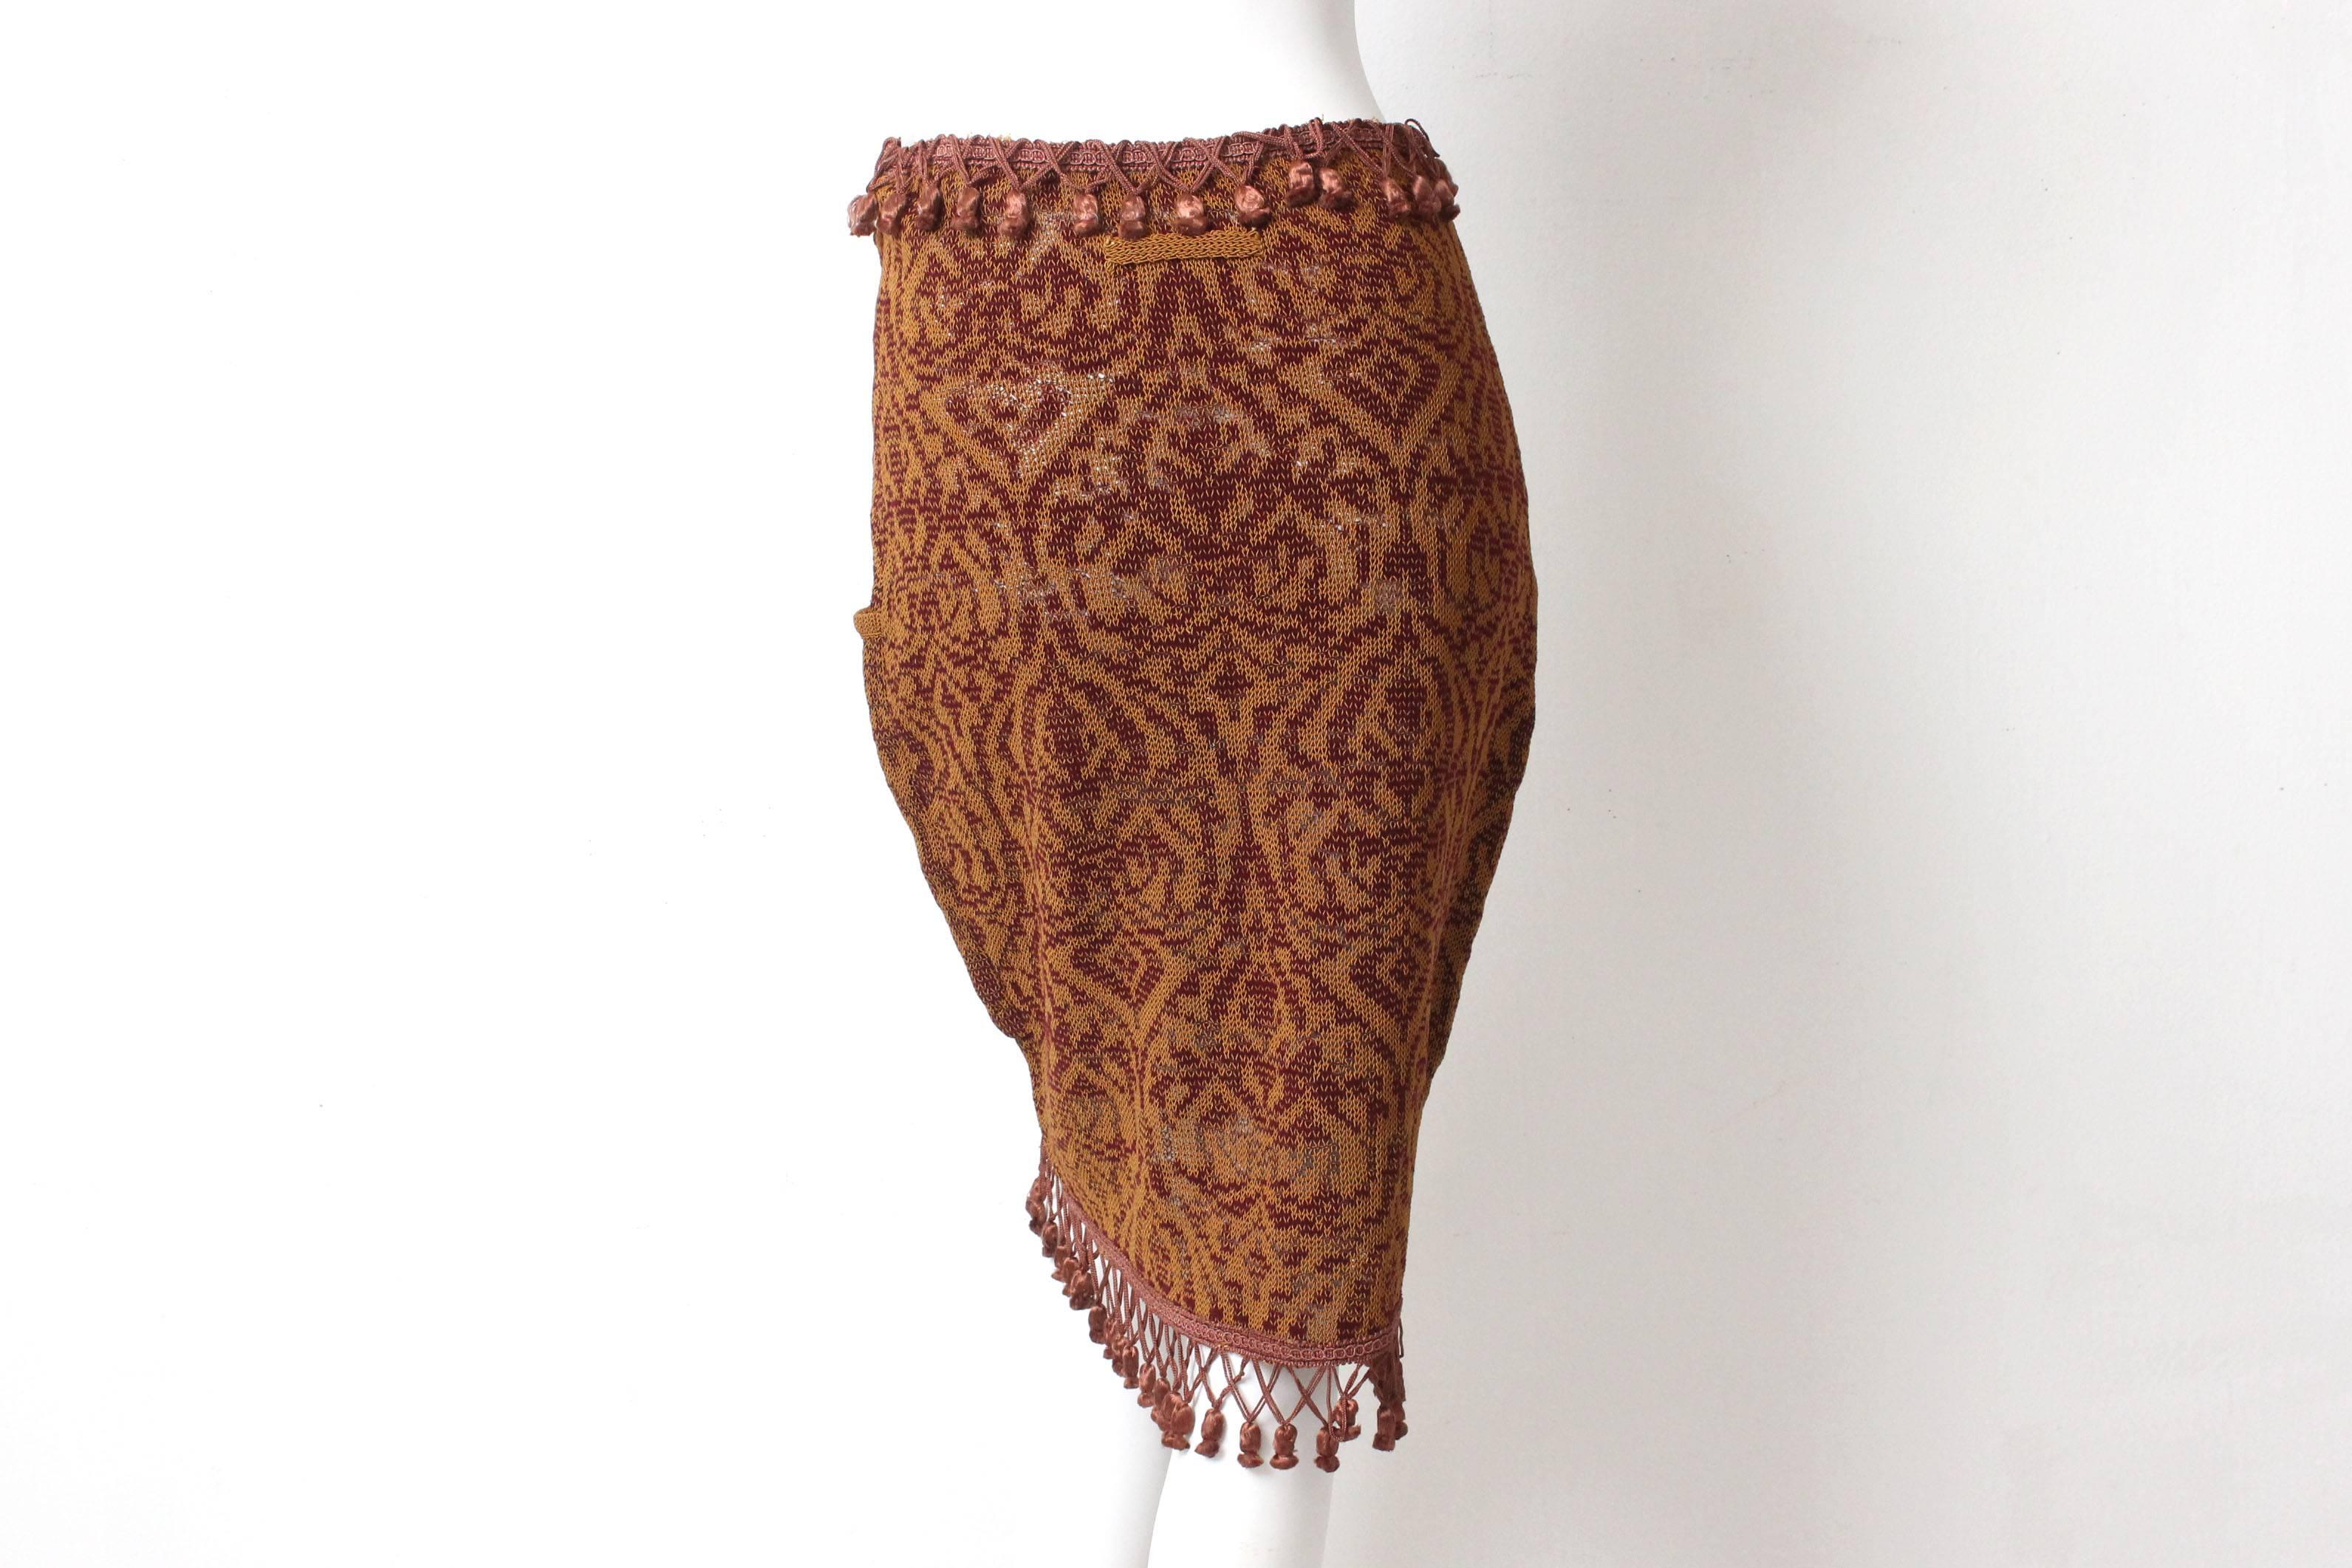 This skirt by Jean Paul Gaultier has a lush knit pattern and hugs the body perfectly with a fitted high waist. There are a row of tassels at the waist and at the hem. It is further adorned with two front pockets and a zippered front.